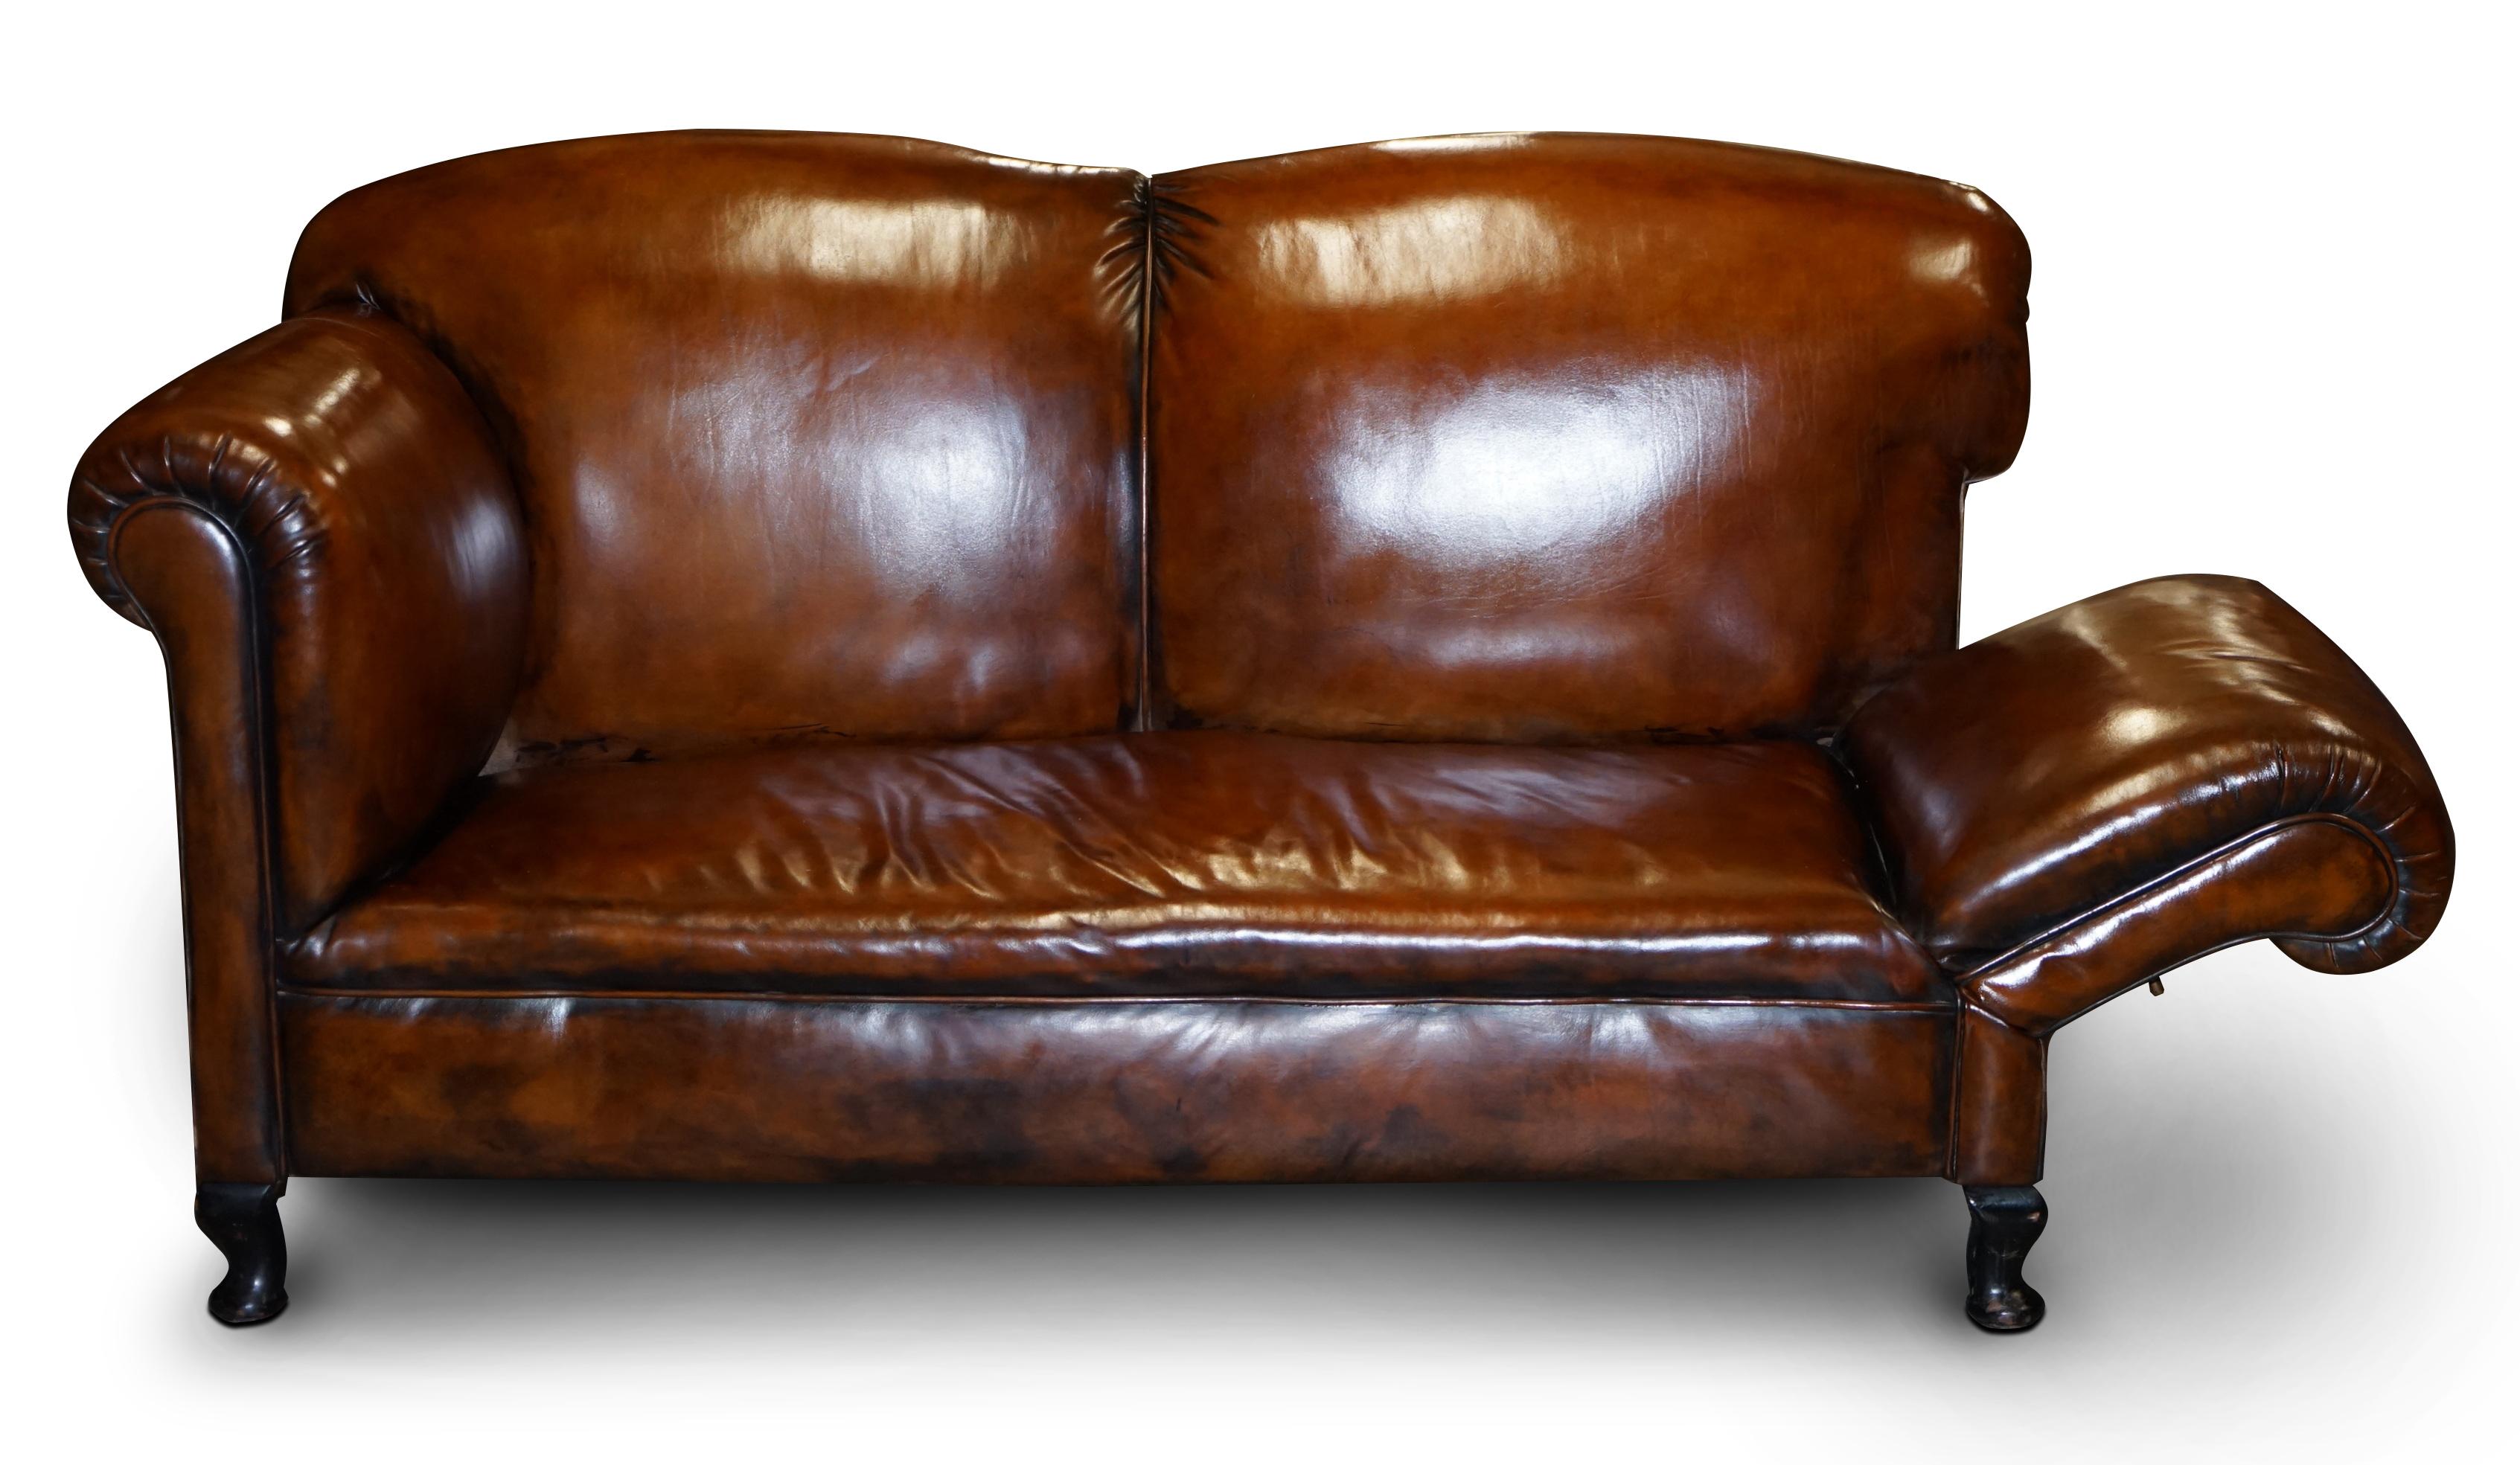 Fully Restored Whisky Brown Leather Drop Arm Chaise Lounge Sofa Horse Hair Fill For Sale 7